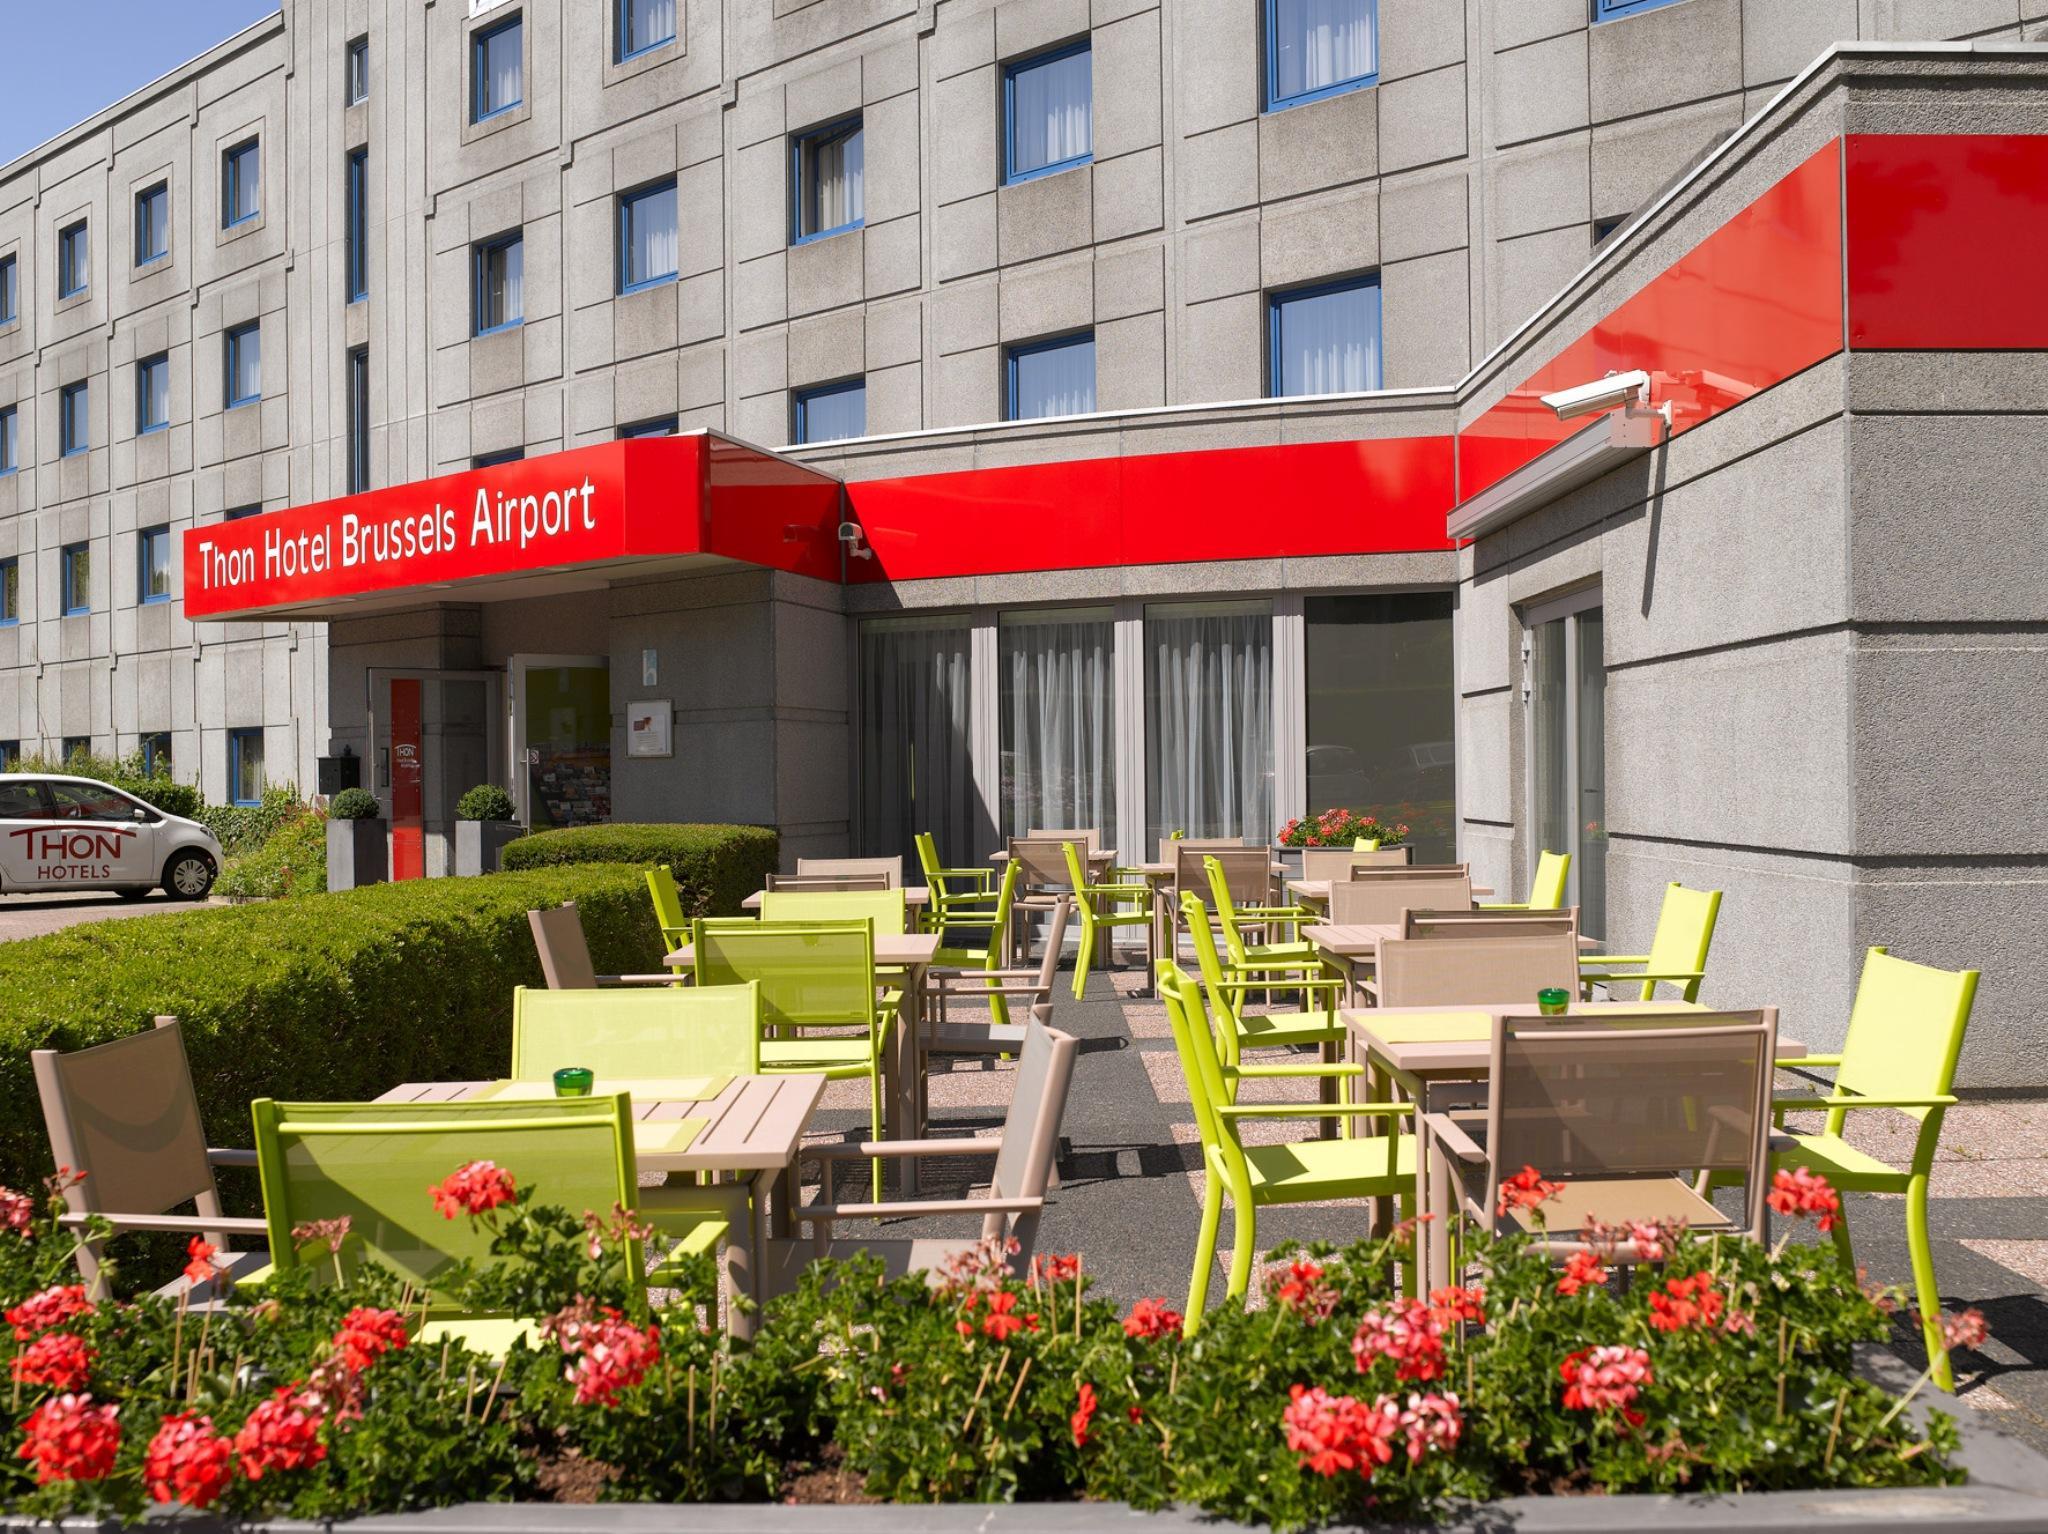 Thon Hotel Brussels Airport Brussels FAQ 2017, What facilities are there in Thon Hotel Brussels Airport Brussels 2017, What Languages Spoken are Supported in Thon Hotel Brussels Airport Brussels 2017, Which payment cards are accepted in Thon Hotel Brussels Airport Brussels , Brussels Thon Hotel Brussels Airport room facilities and services Q&A 2017, Brussels Thon Hotel Brussels Airport online booking services 2017, Brussels Thon Hotel Brussels Airport address 2017, Brussels Thon Hotel Brussels Airport telephone number 2017,Brussels Thon Hotel Brussels Airport map 2017, Brussels Thon Hotel Brussels Airport traffic guide 2017, how to go Brussels Thon Hotel Brussels Airport, Brussels Thon Hotel Brussels Airport booking online 2017, Brussels Thon Hotel Brussels Airport room types 2017.